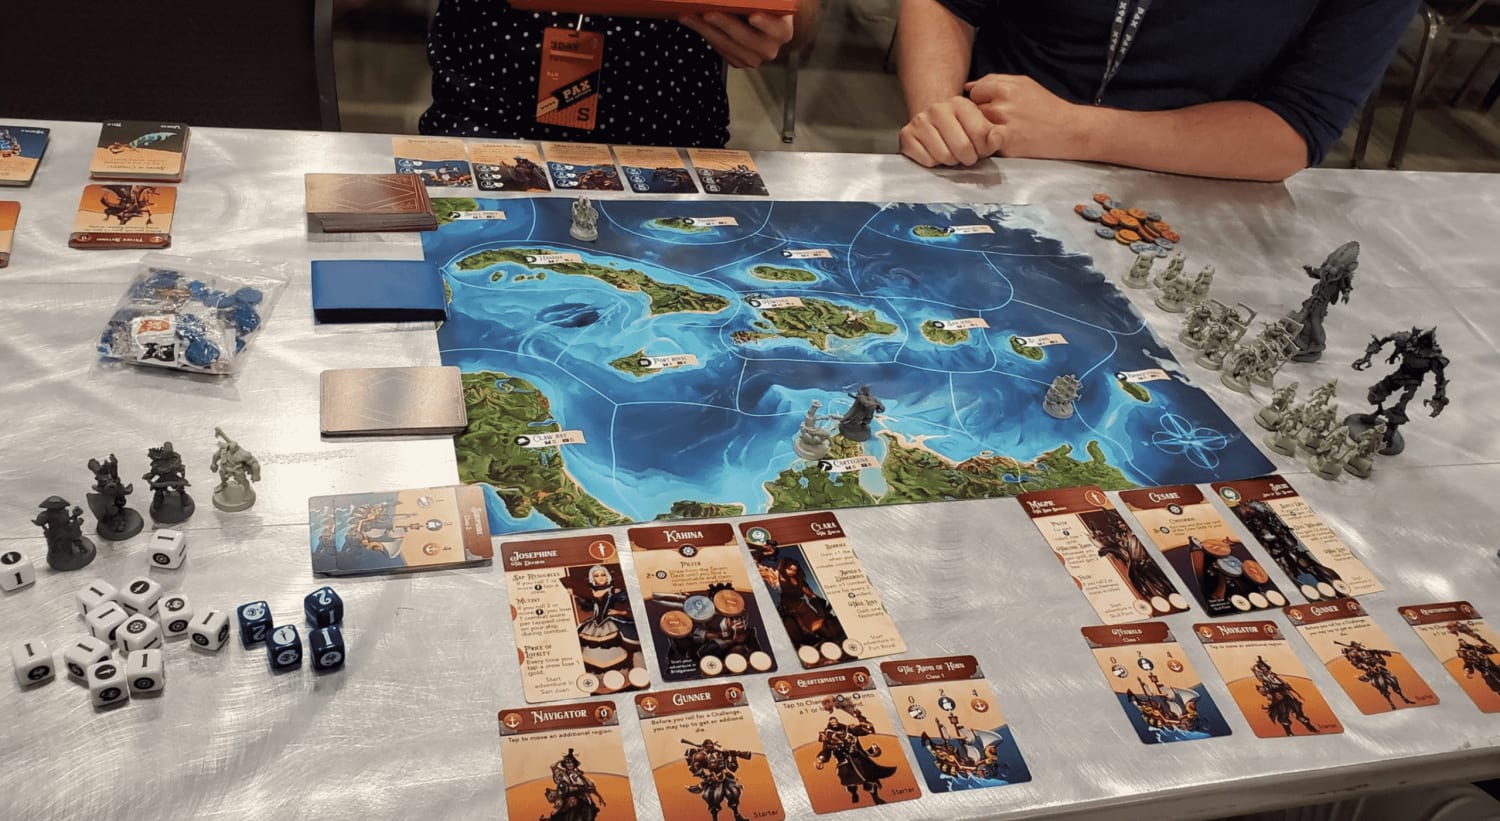 PAX South 2020: Sea of Legends is a Four Player Table Top Adventure